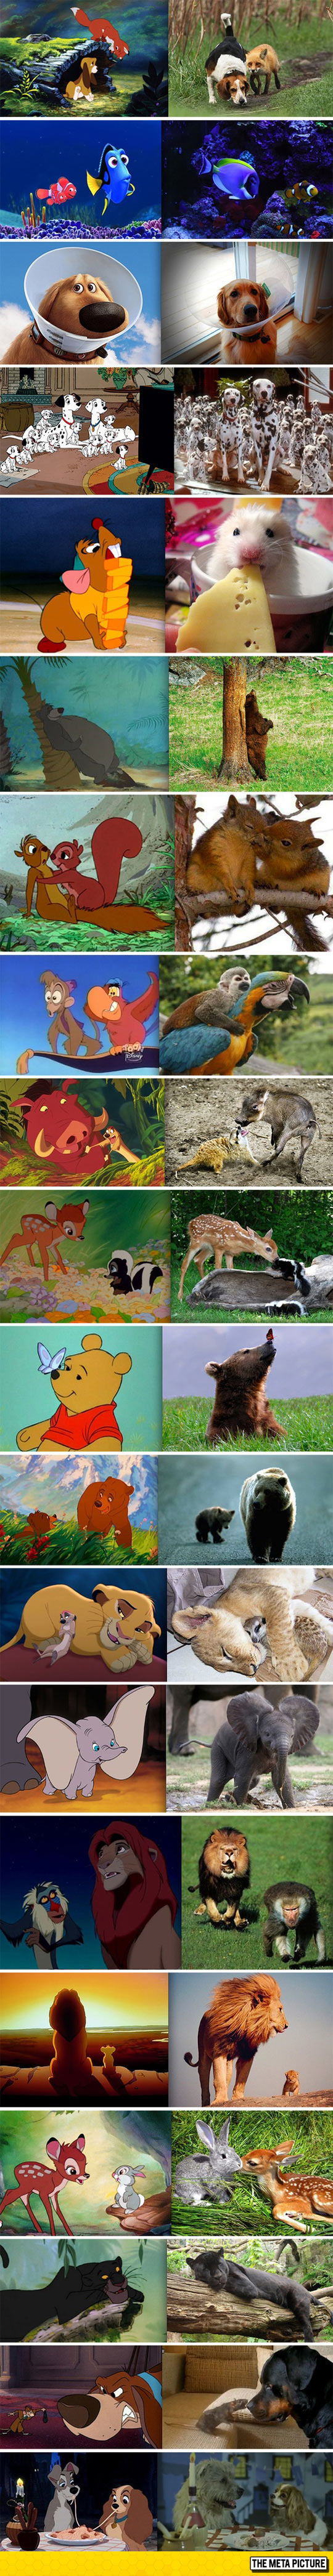 Classic Disney Movies In Real Life